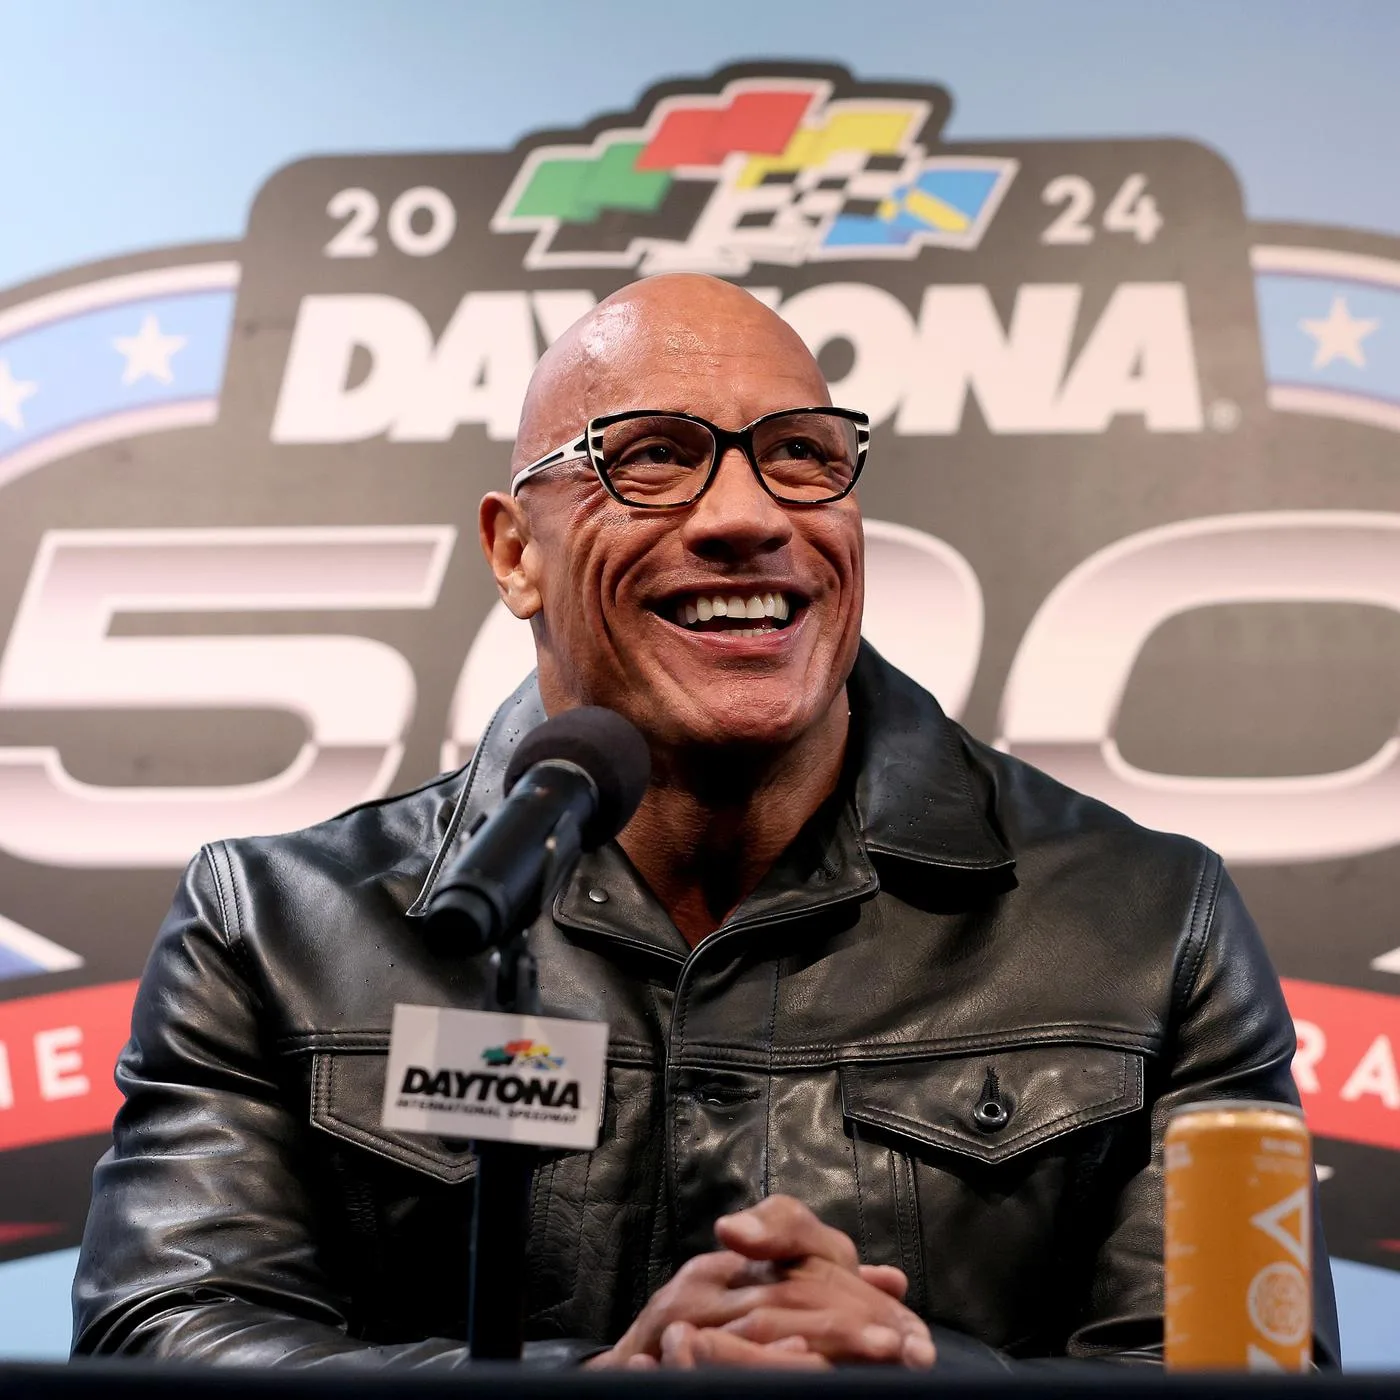 Dwayne "The Rock" Johnson (above) talks at a press event for last weekend's Daytona 500. Johnson is a part of the new United Football League (UFL), a spring football league set to launch March 30 with an excitement seldom seen before. (Photo courtesy of LISTENNOTES.COM)